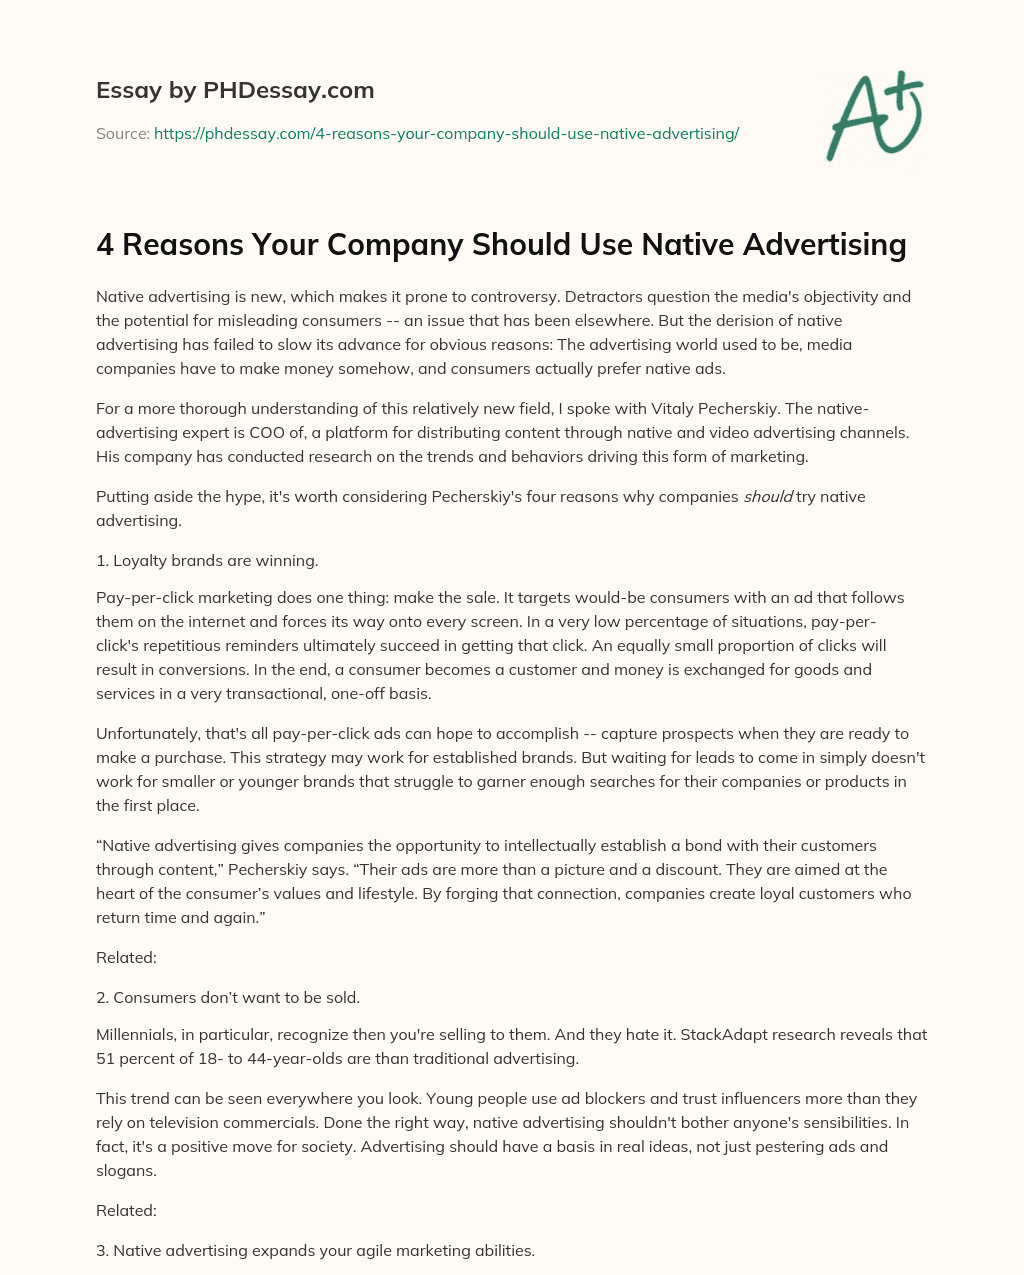 4 Reasons Your Company Should Use Native Advertising essay